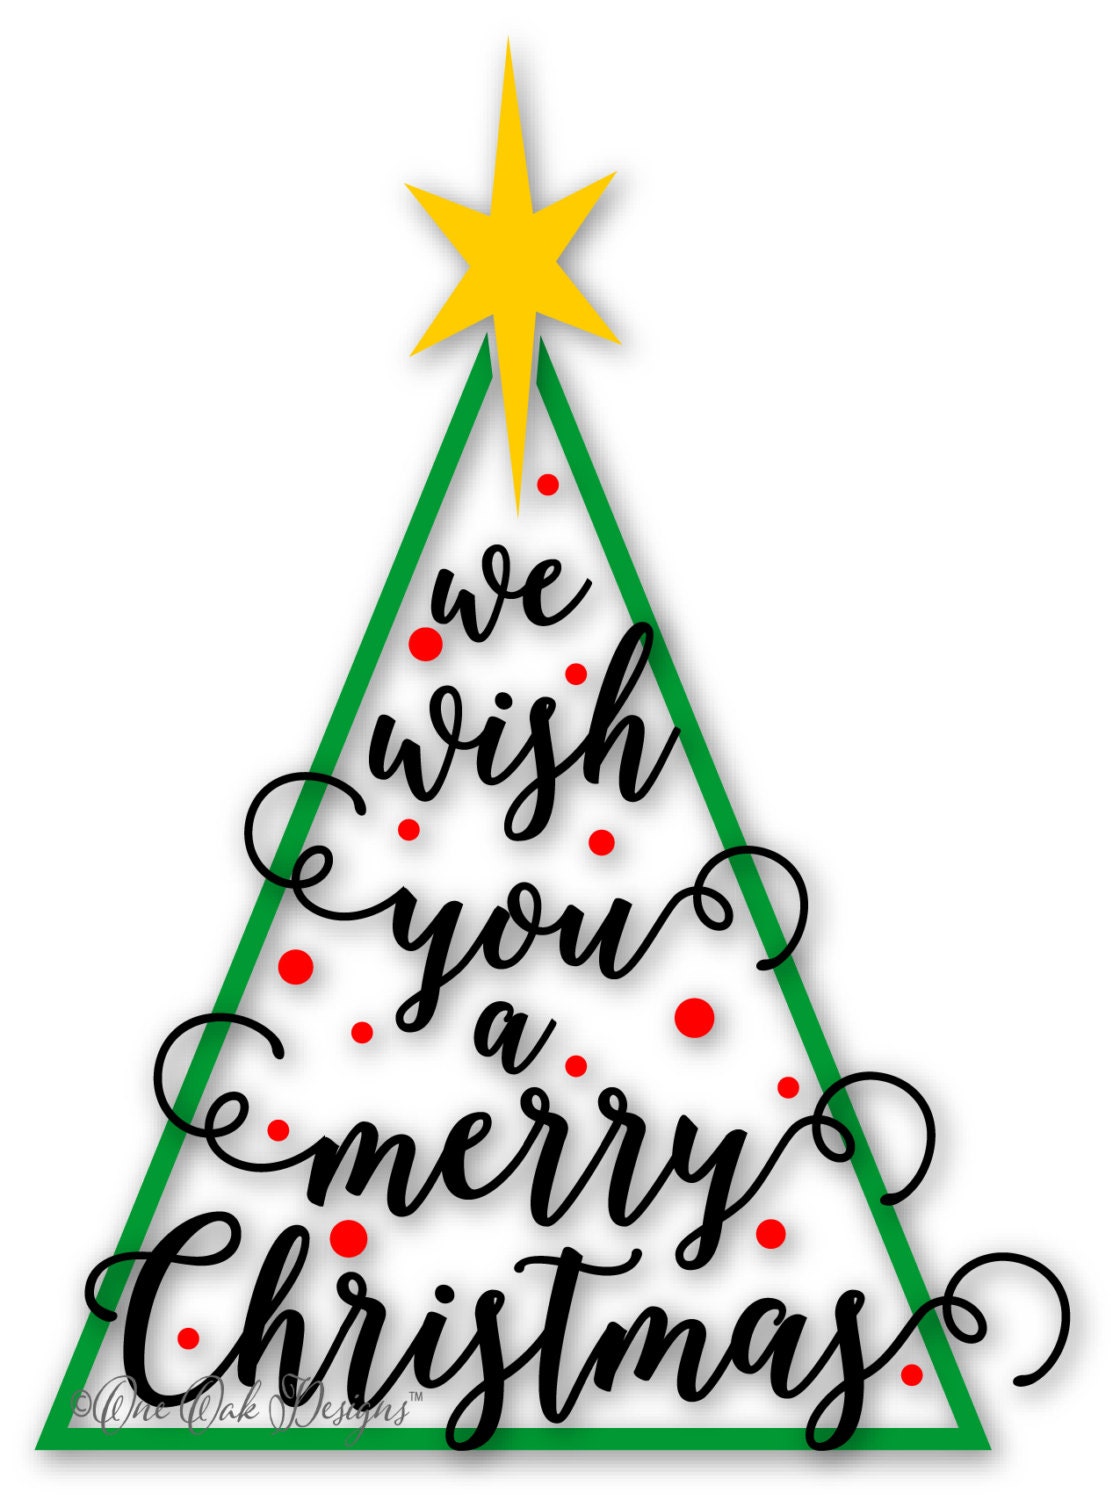 Download Merry Christmas SVG File / PDF / dxf / png / jpg / ai / eps